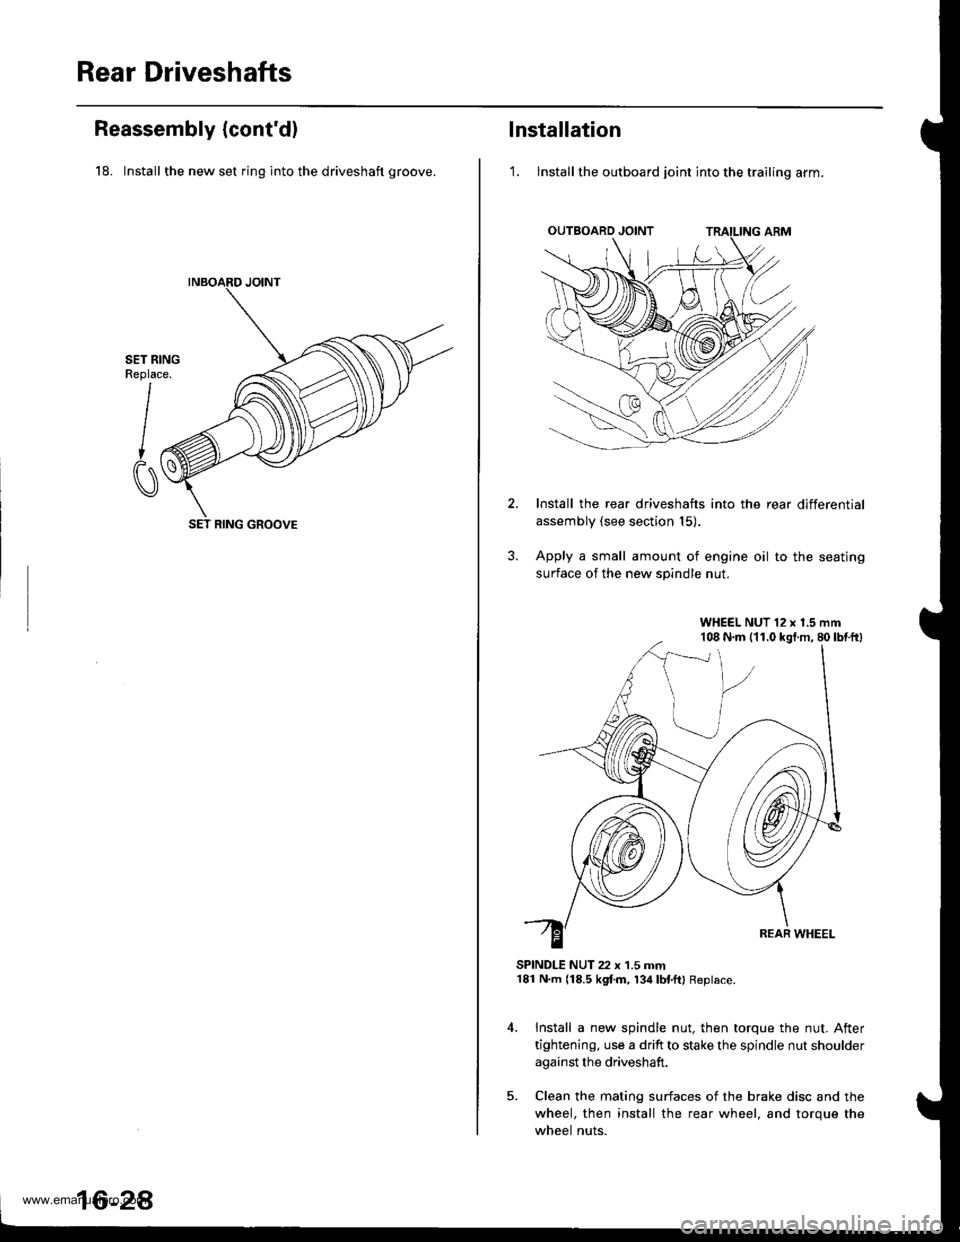 HONDA CR-V 1998 RD1-RD3 / 1.G Repair Manual 
Rear Driveshafts
Reassembly (contd)
18. Install the new set ring into the driveshaft groove.
SET RINGReplace.
I
CI
SET RING GROOVE
16-2A
lnstallation
1. lnstall the outboard joint into the trailing